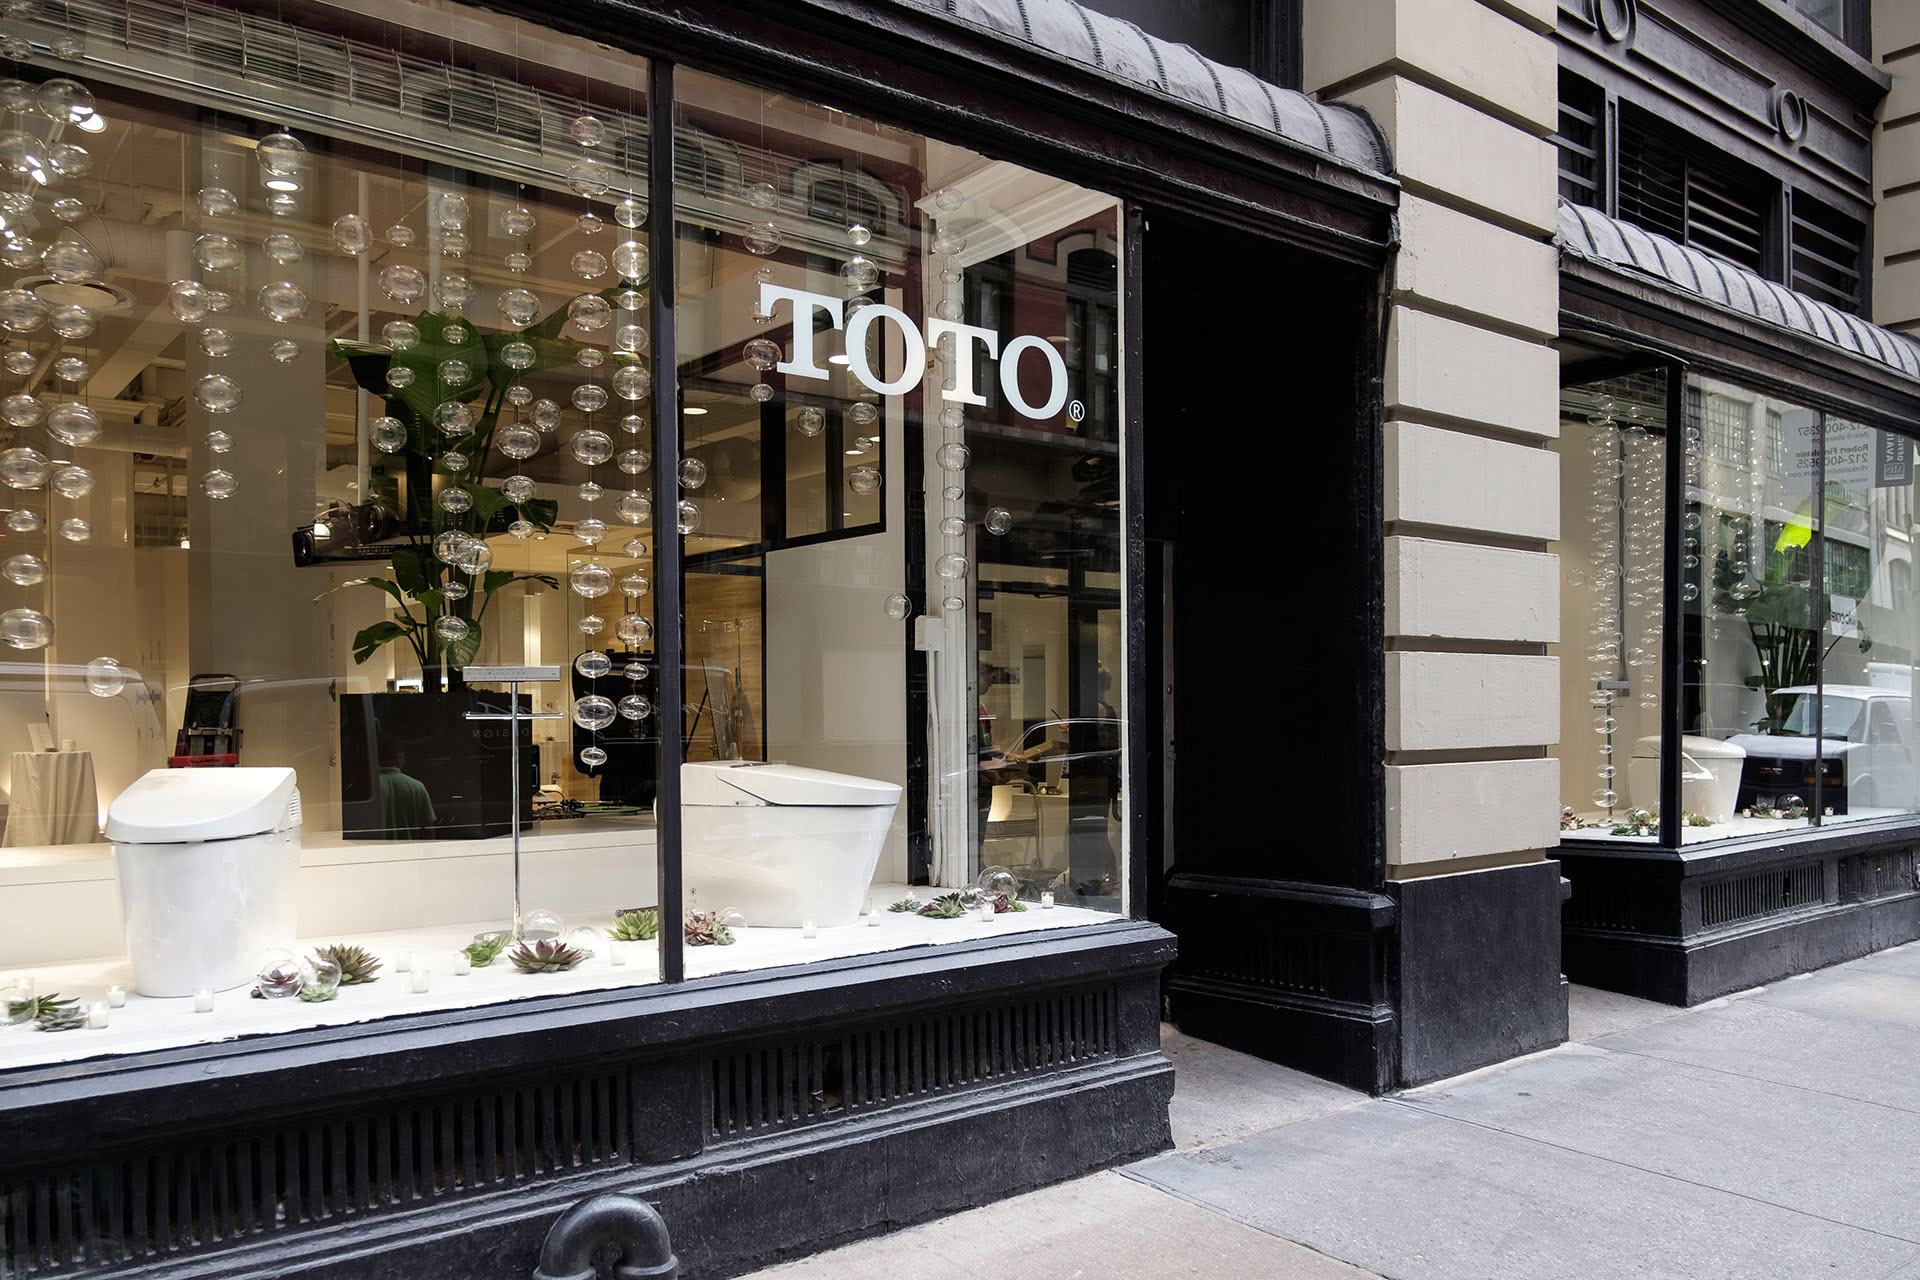 Outside view of the TOTO Gallery in New York, NY.